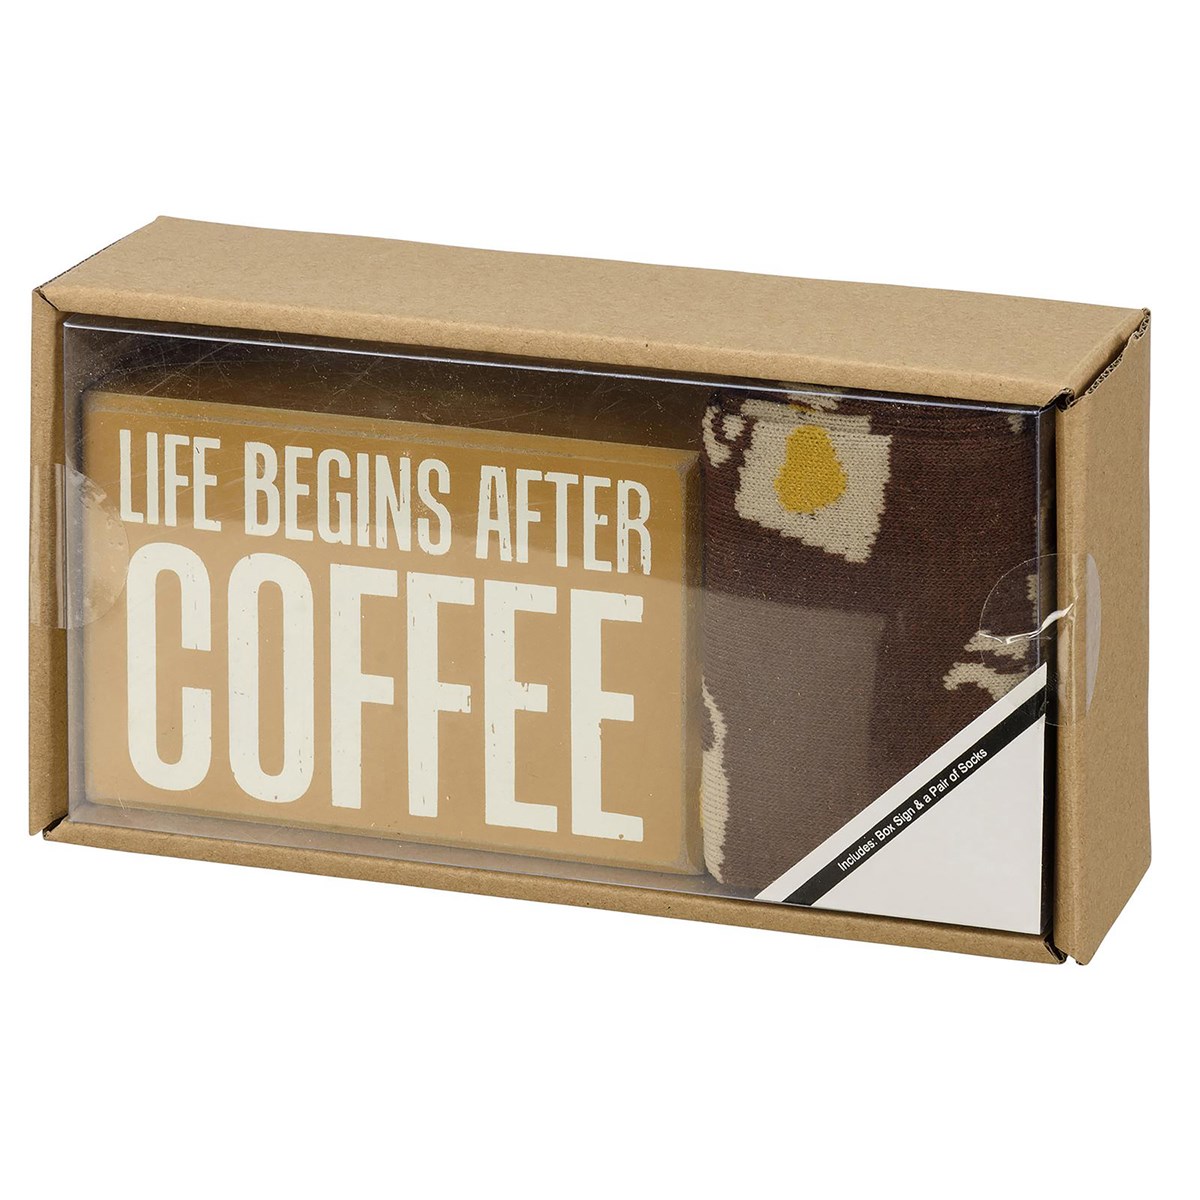 After Coffee Box Sign And Sock Set - Wood, Cotton, Nylon, Spandex